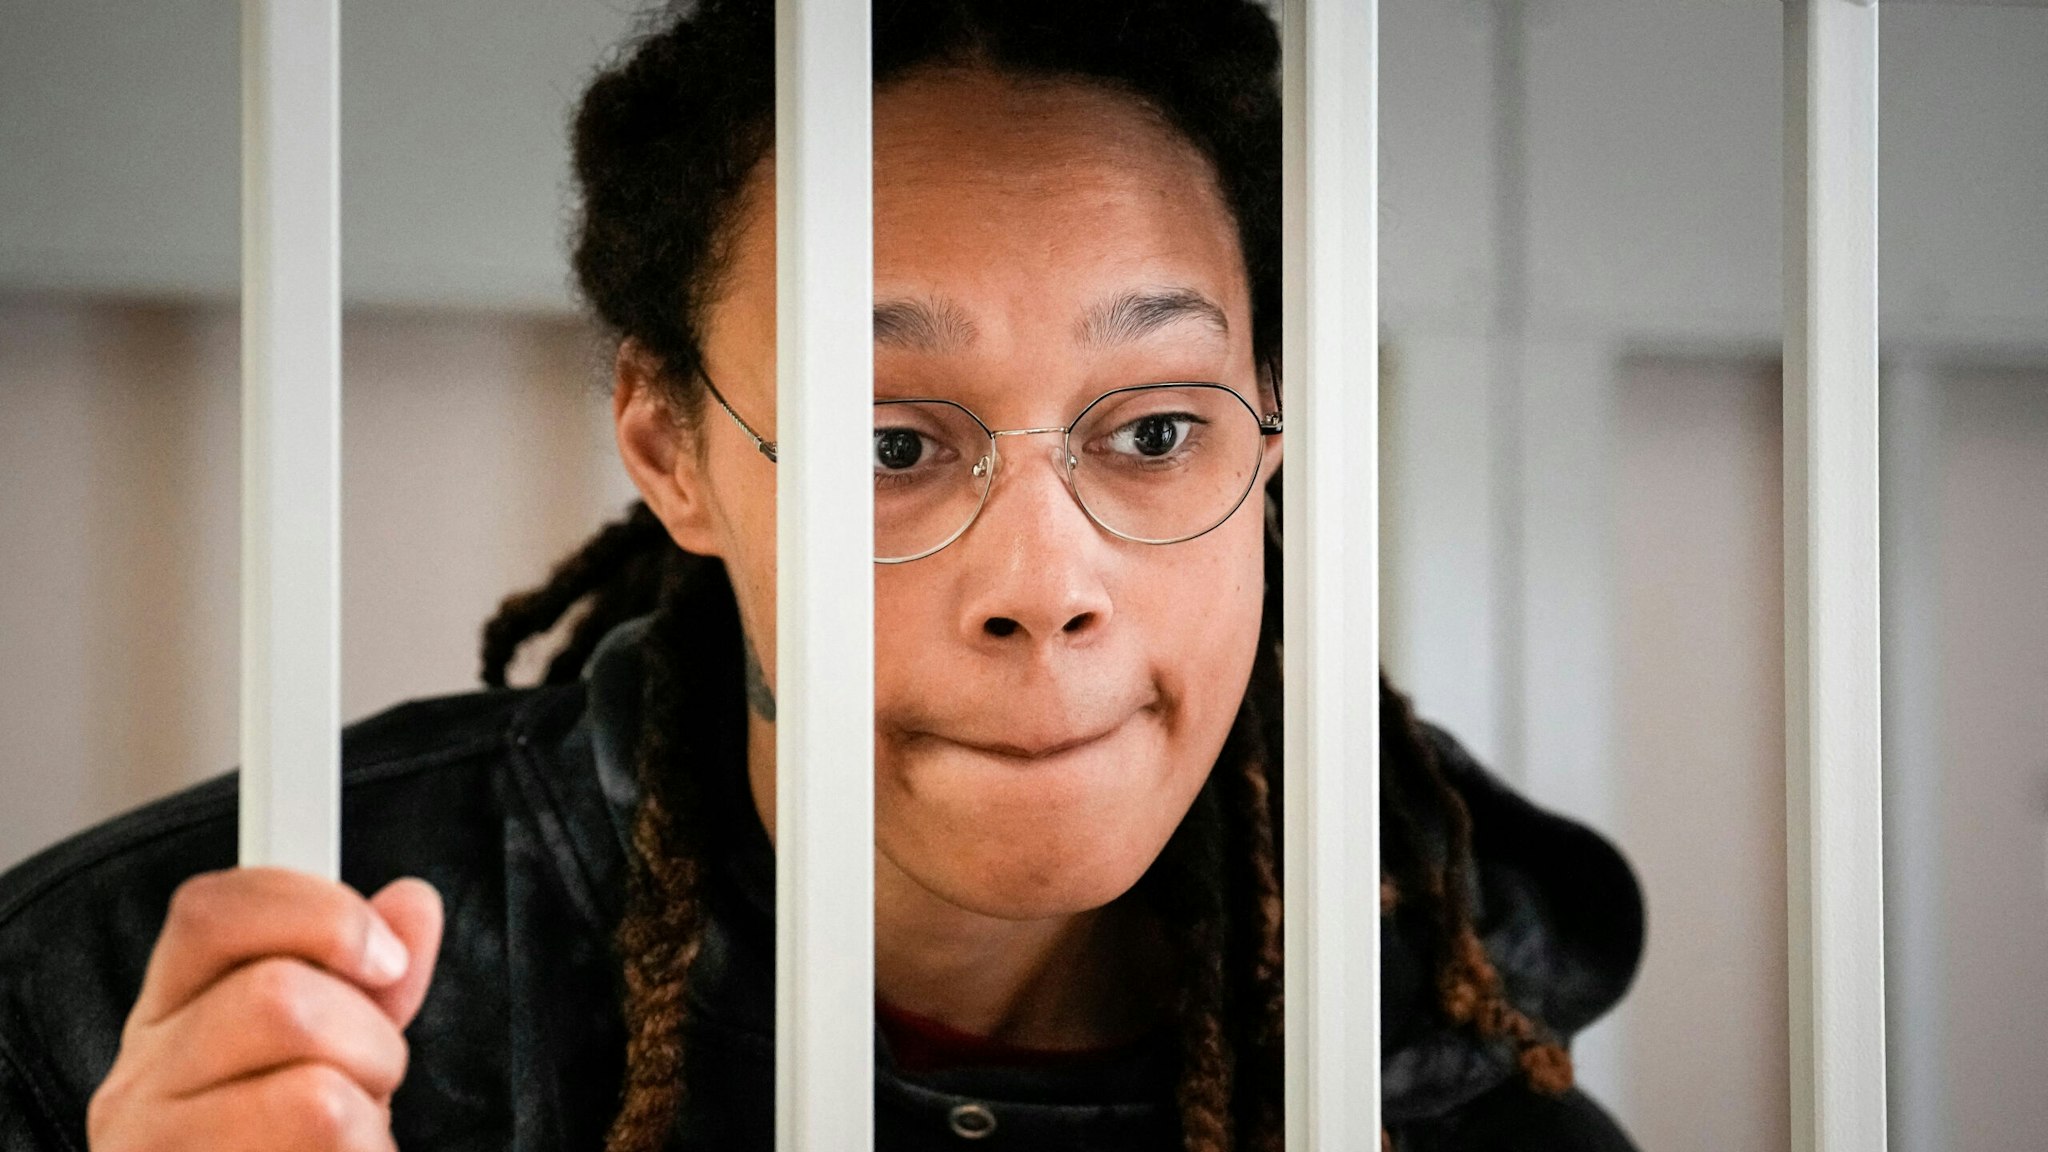 US WNBA basketball superstar Brittney Griner reacts inside a defendants' cage before a hearing at the Khimki Court, outside Moscow on July 26, 2022. - Griner, a two-time Olympic gold medallist and WNBA champion, was detained at Moscow airport in February on charges of carrying in her luggage vape cartridges with cannabis oil, which could carry a 10-year prison sentence.